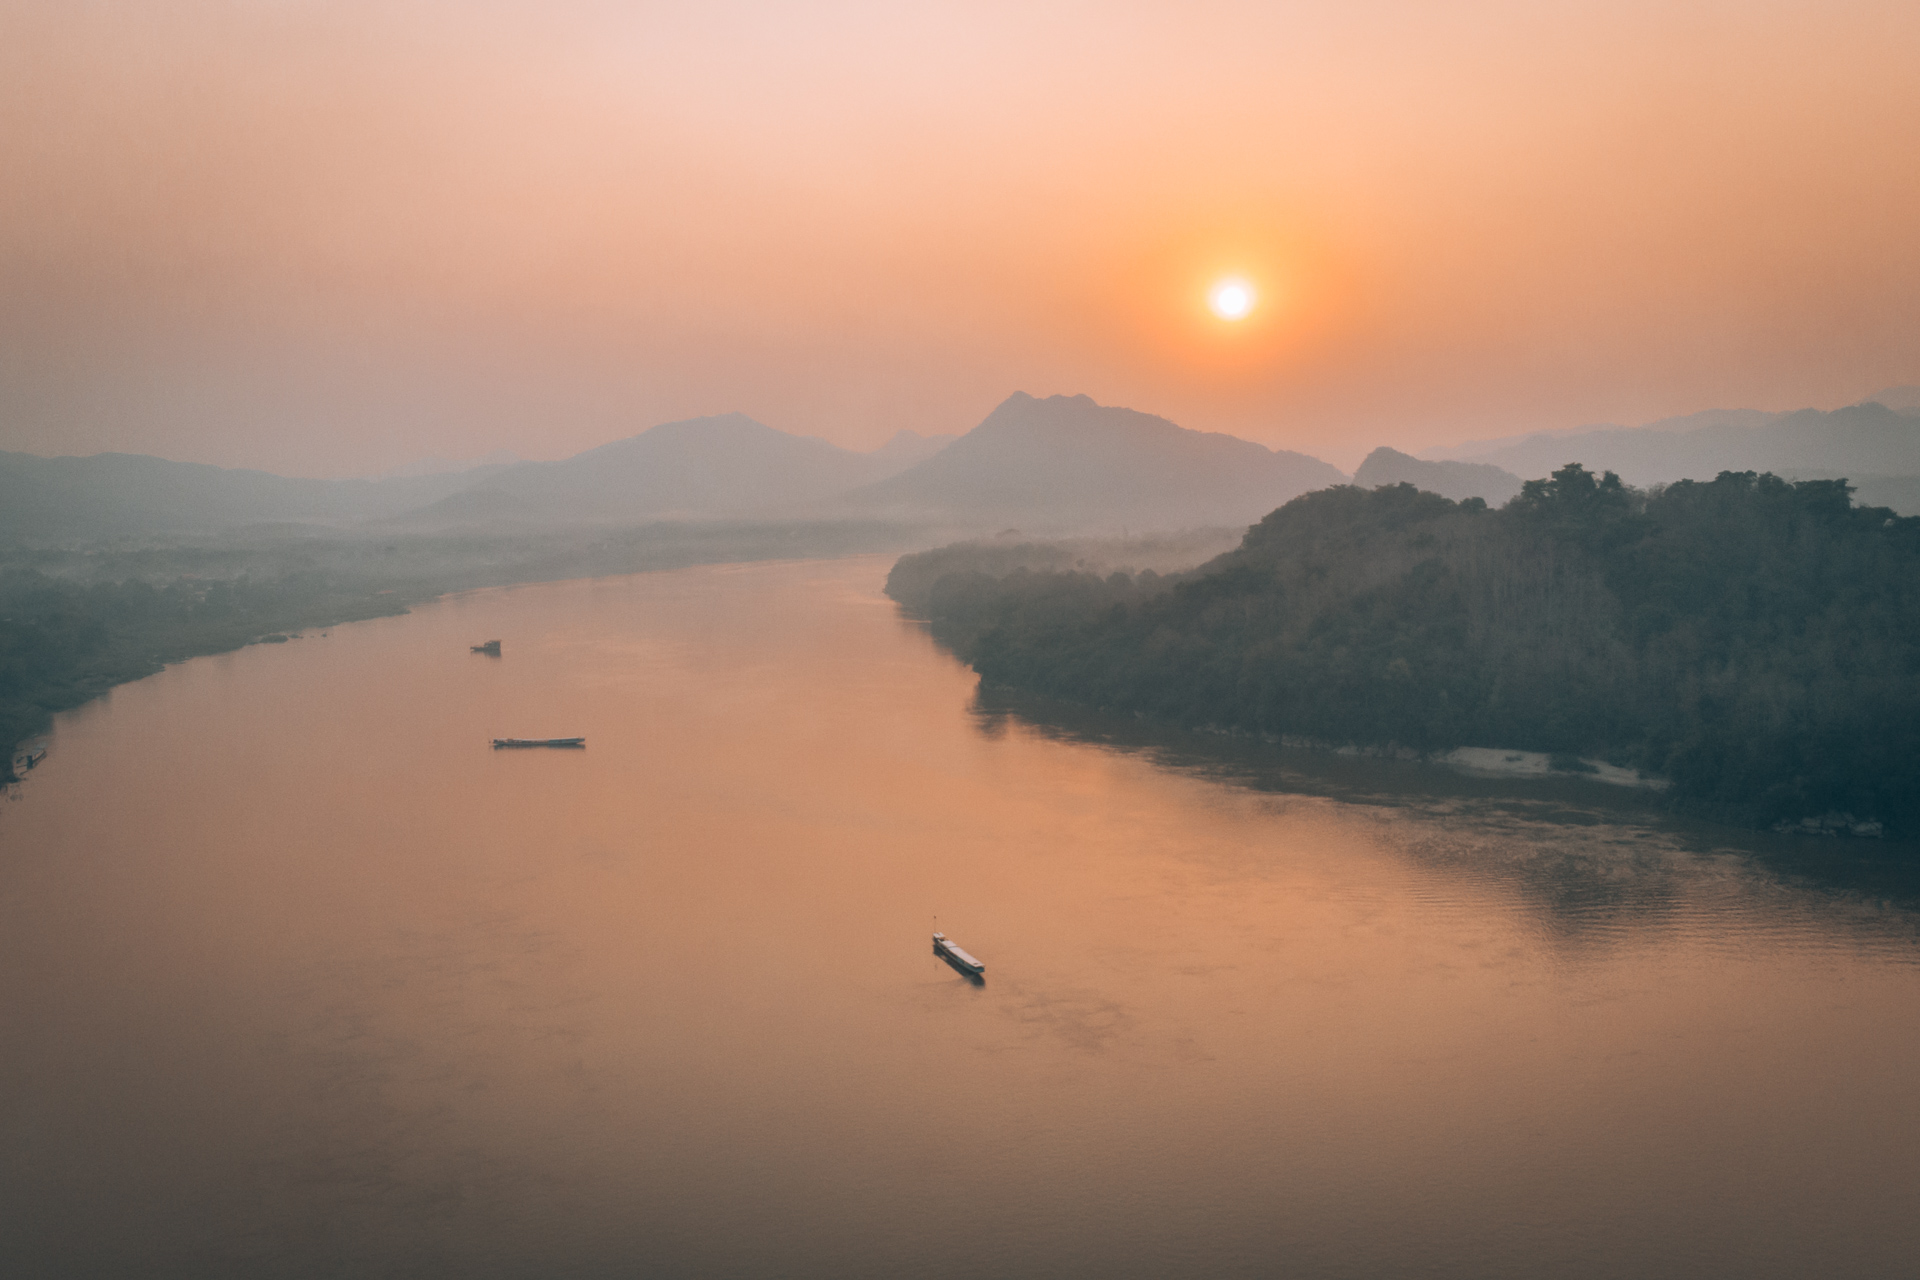 THE LUANG SAY MEKONG RIVER CRUISE - THE ULTIMATE 2-DAY ADVENTURE IN LAOS